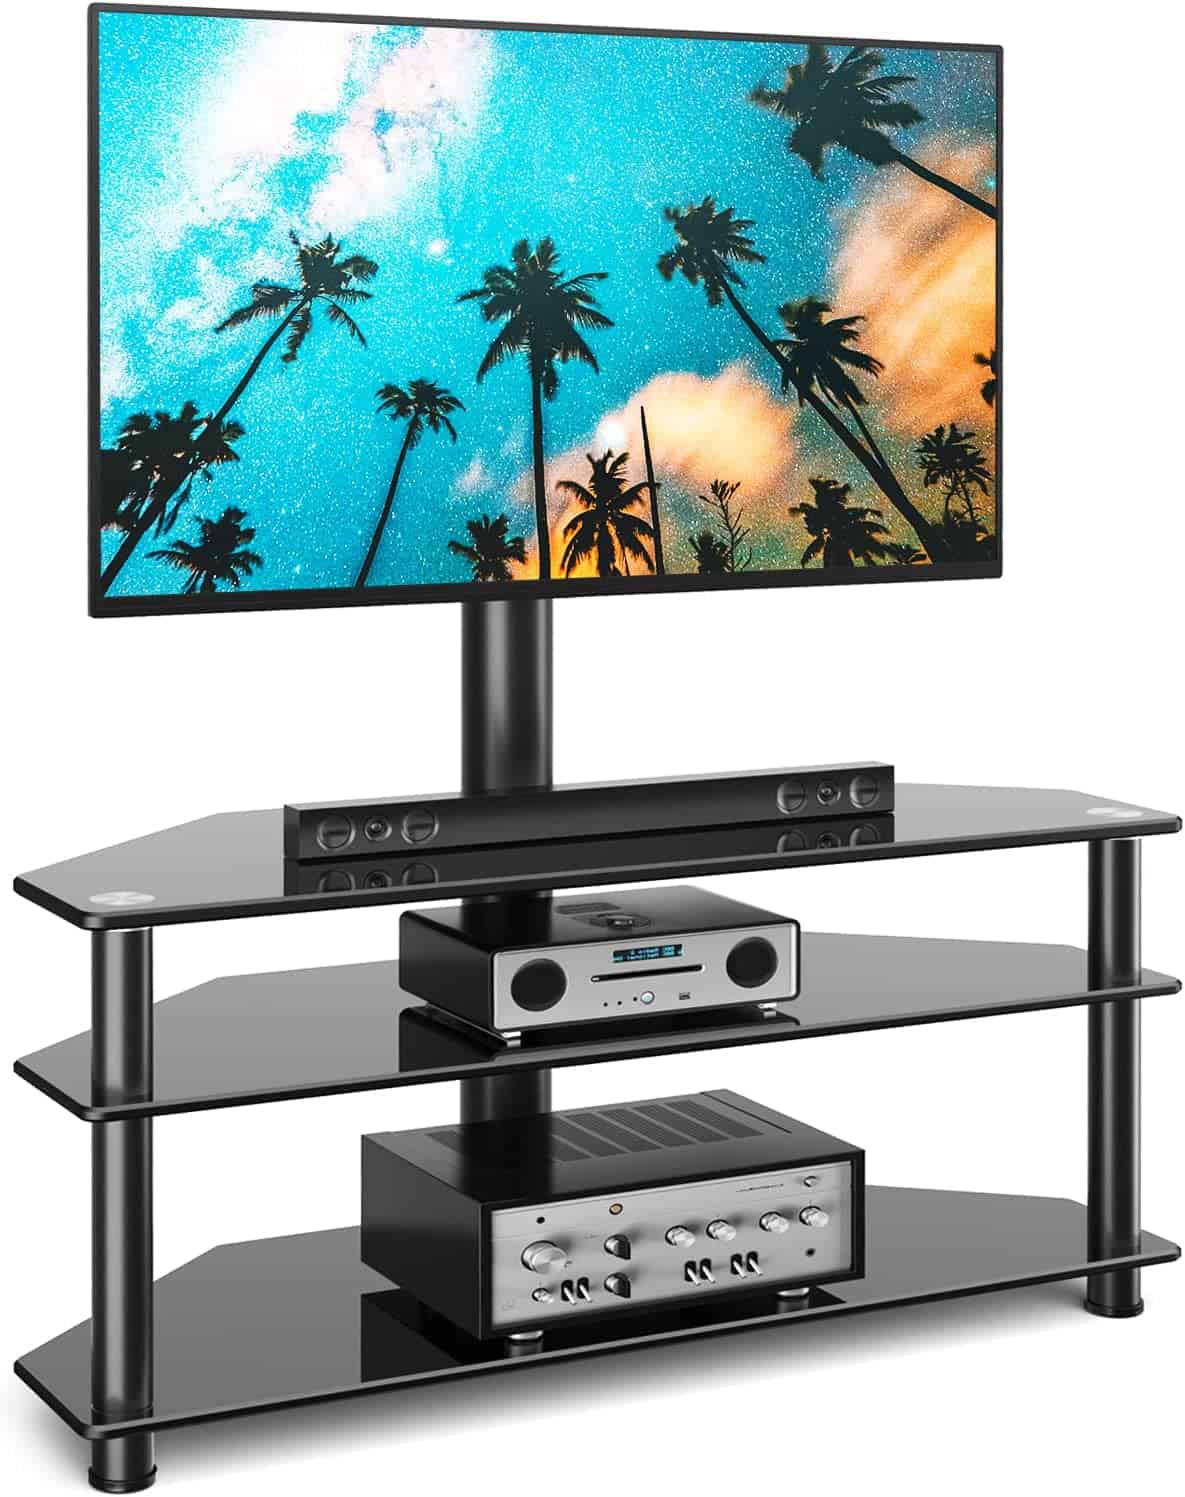 Rfiver Swivel Glass TV Stand with Mount